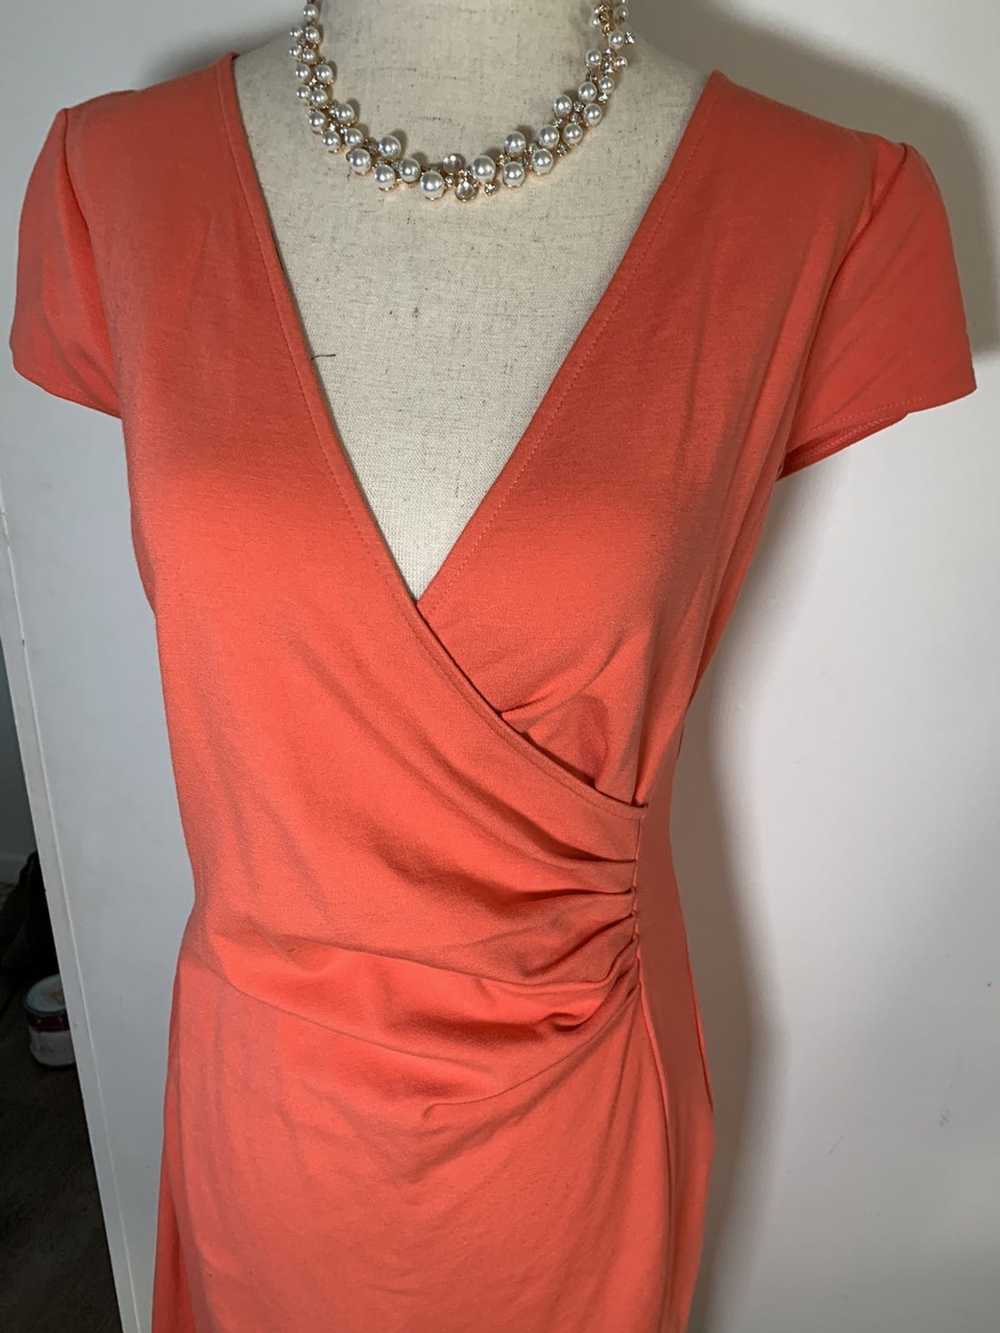 Kenneth Cole Kenneth Cole dress size 6 - image 5